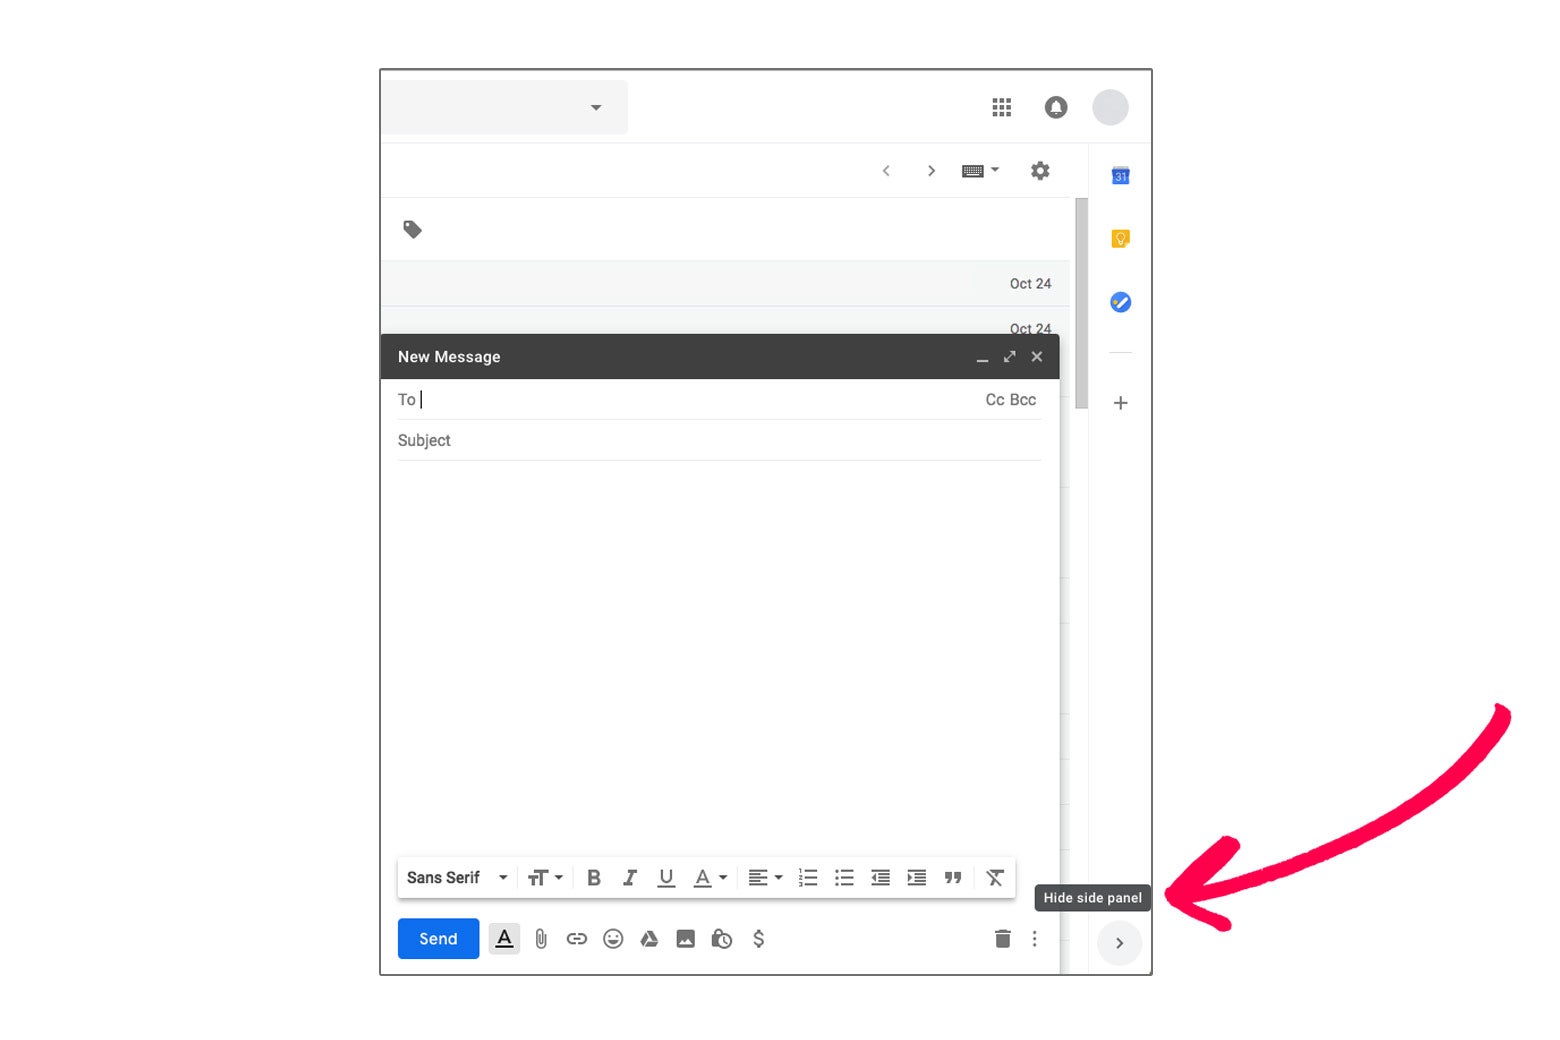 A screenshot shows how to minimize the side panel on Gmail.